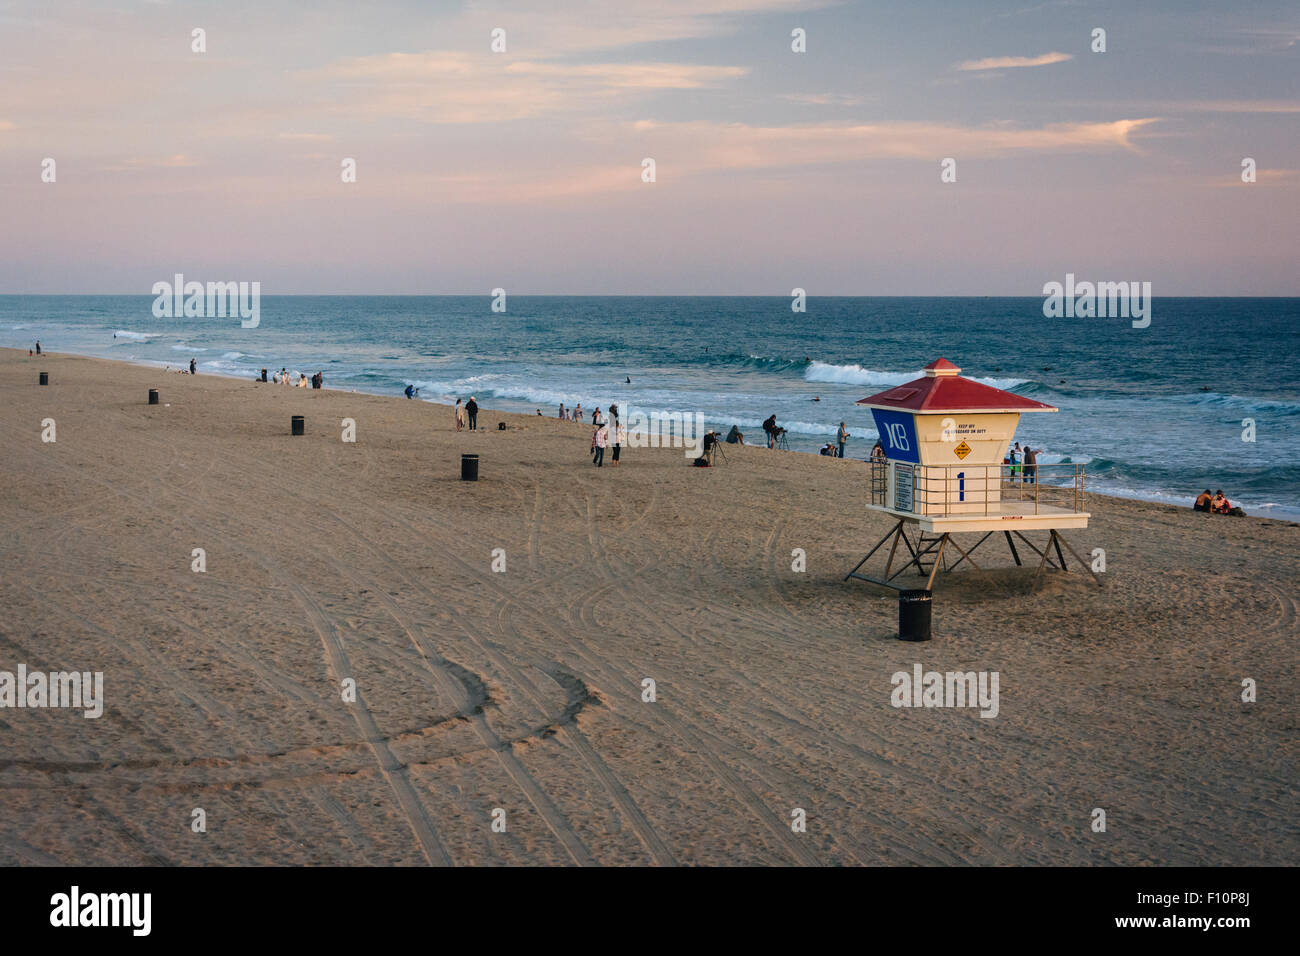 Lifeguard stand on the beach at sunset, in Huntington Beach, California. Stock Photo